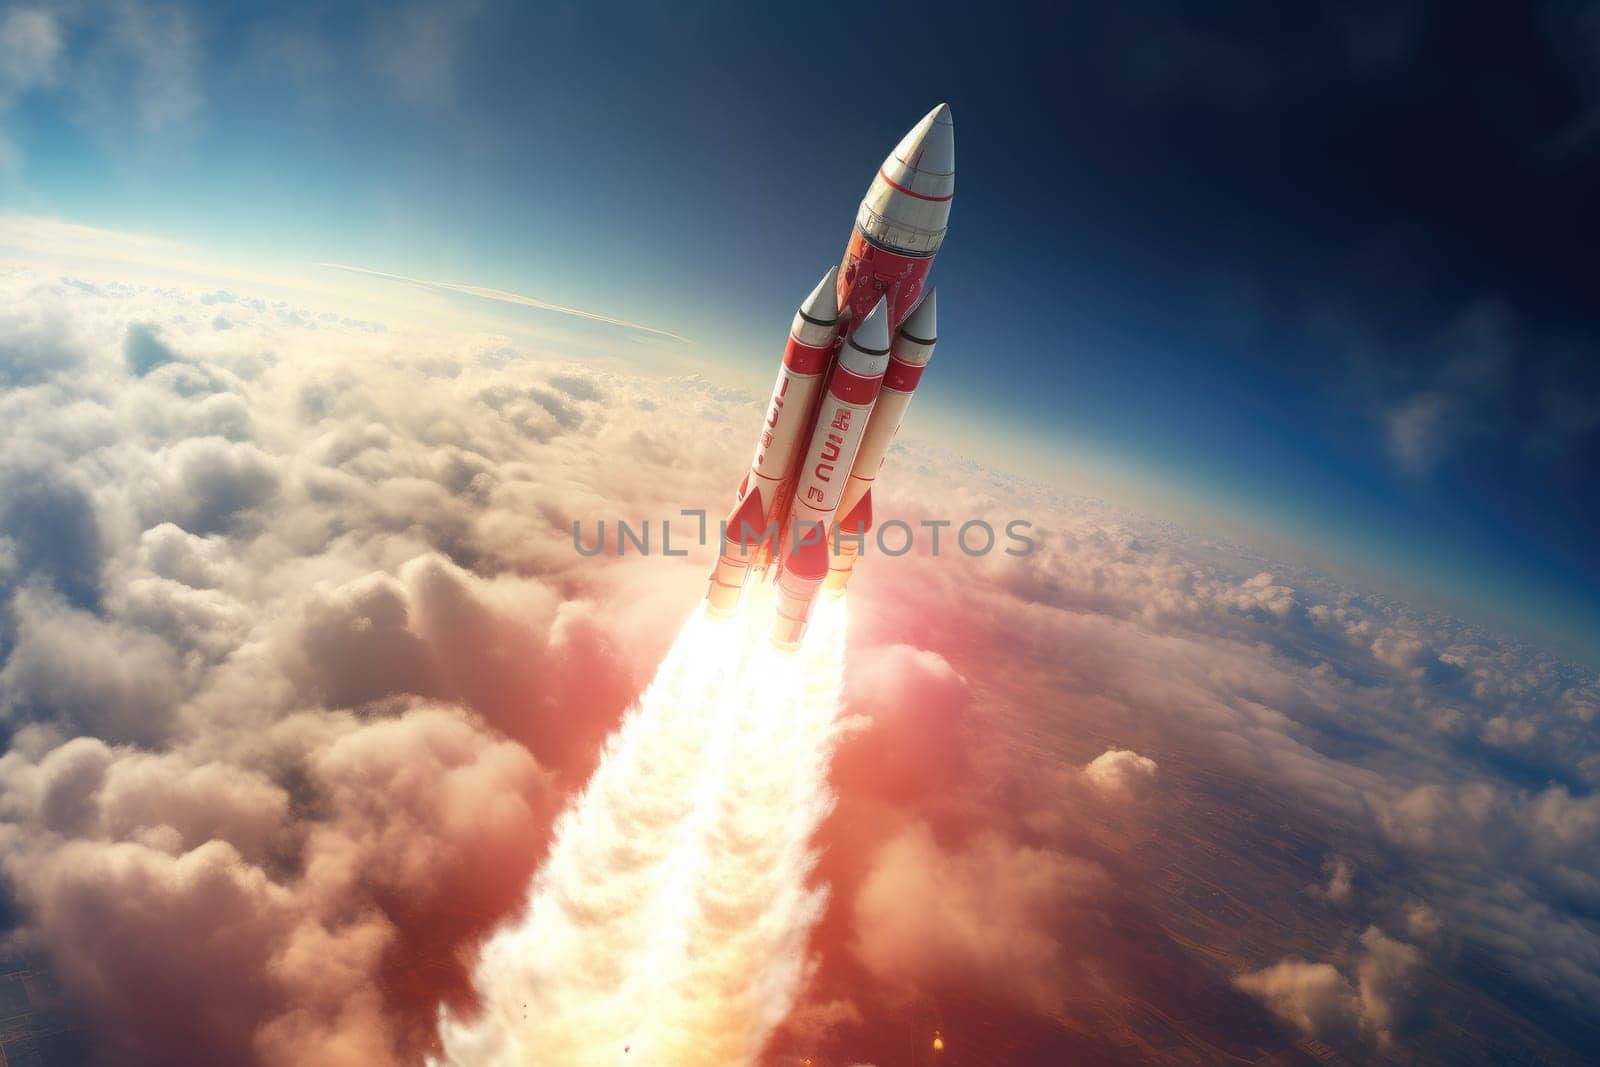 A breathtaking image capturing the launch of a rocket, signifying space exploration and the discovery of new frontiers, showcasing the advancement of technology.